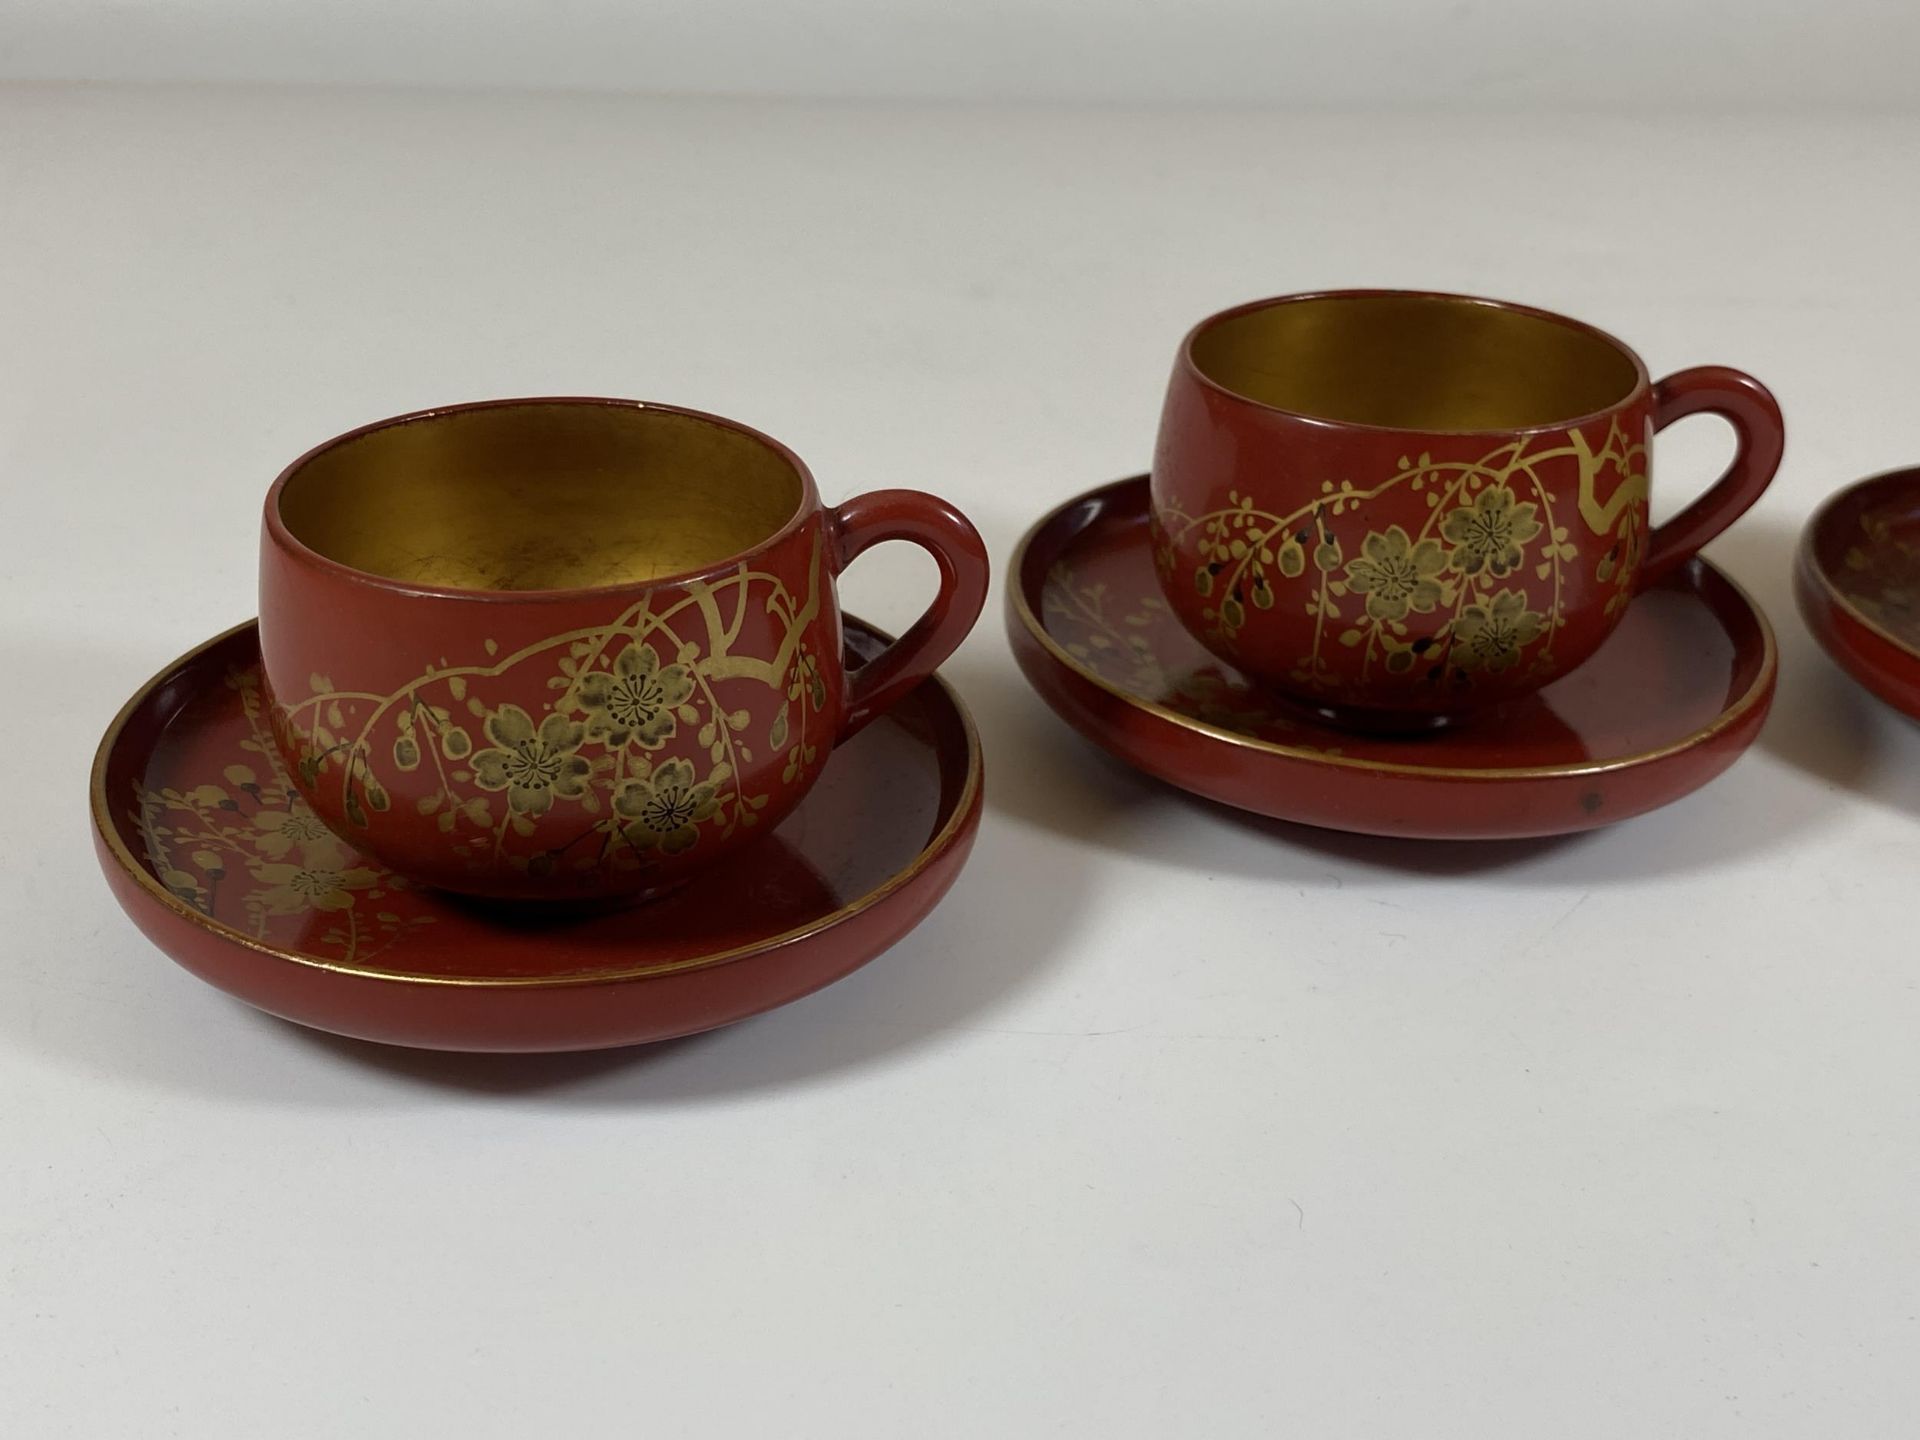 A SET OF FOUR ORIENTAL RED AND GILT LACQUERED CUPS AND SAUCERS, SAUCER DIAMETER 9.5CM - Image 2 of 6